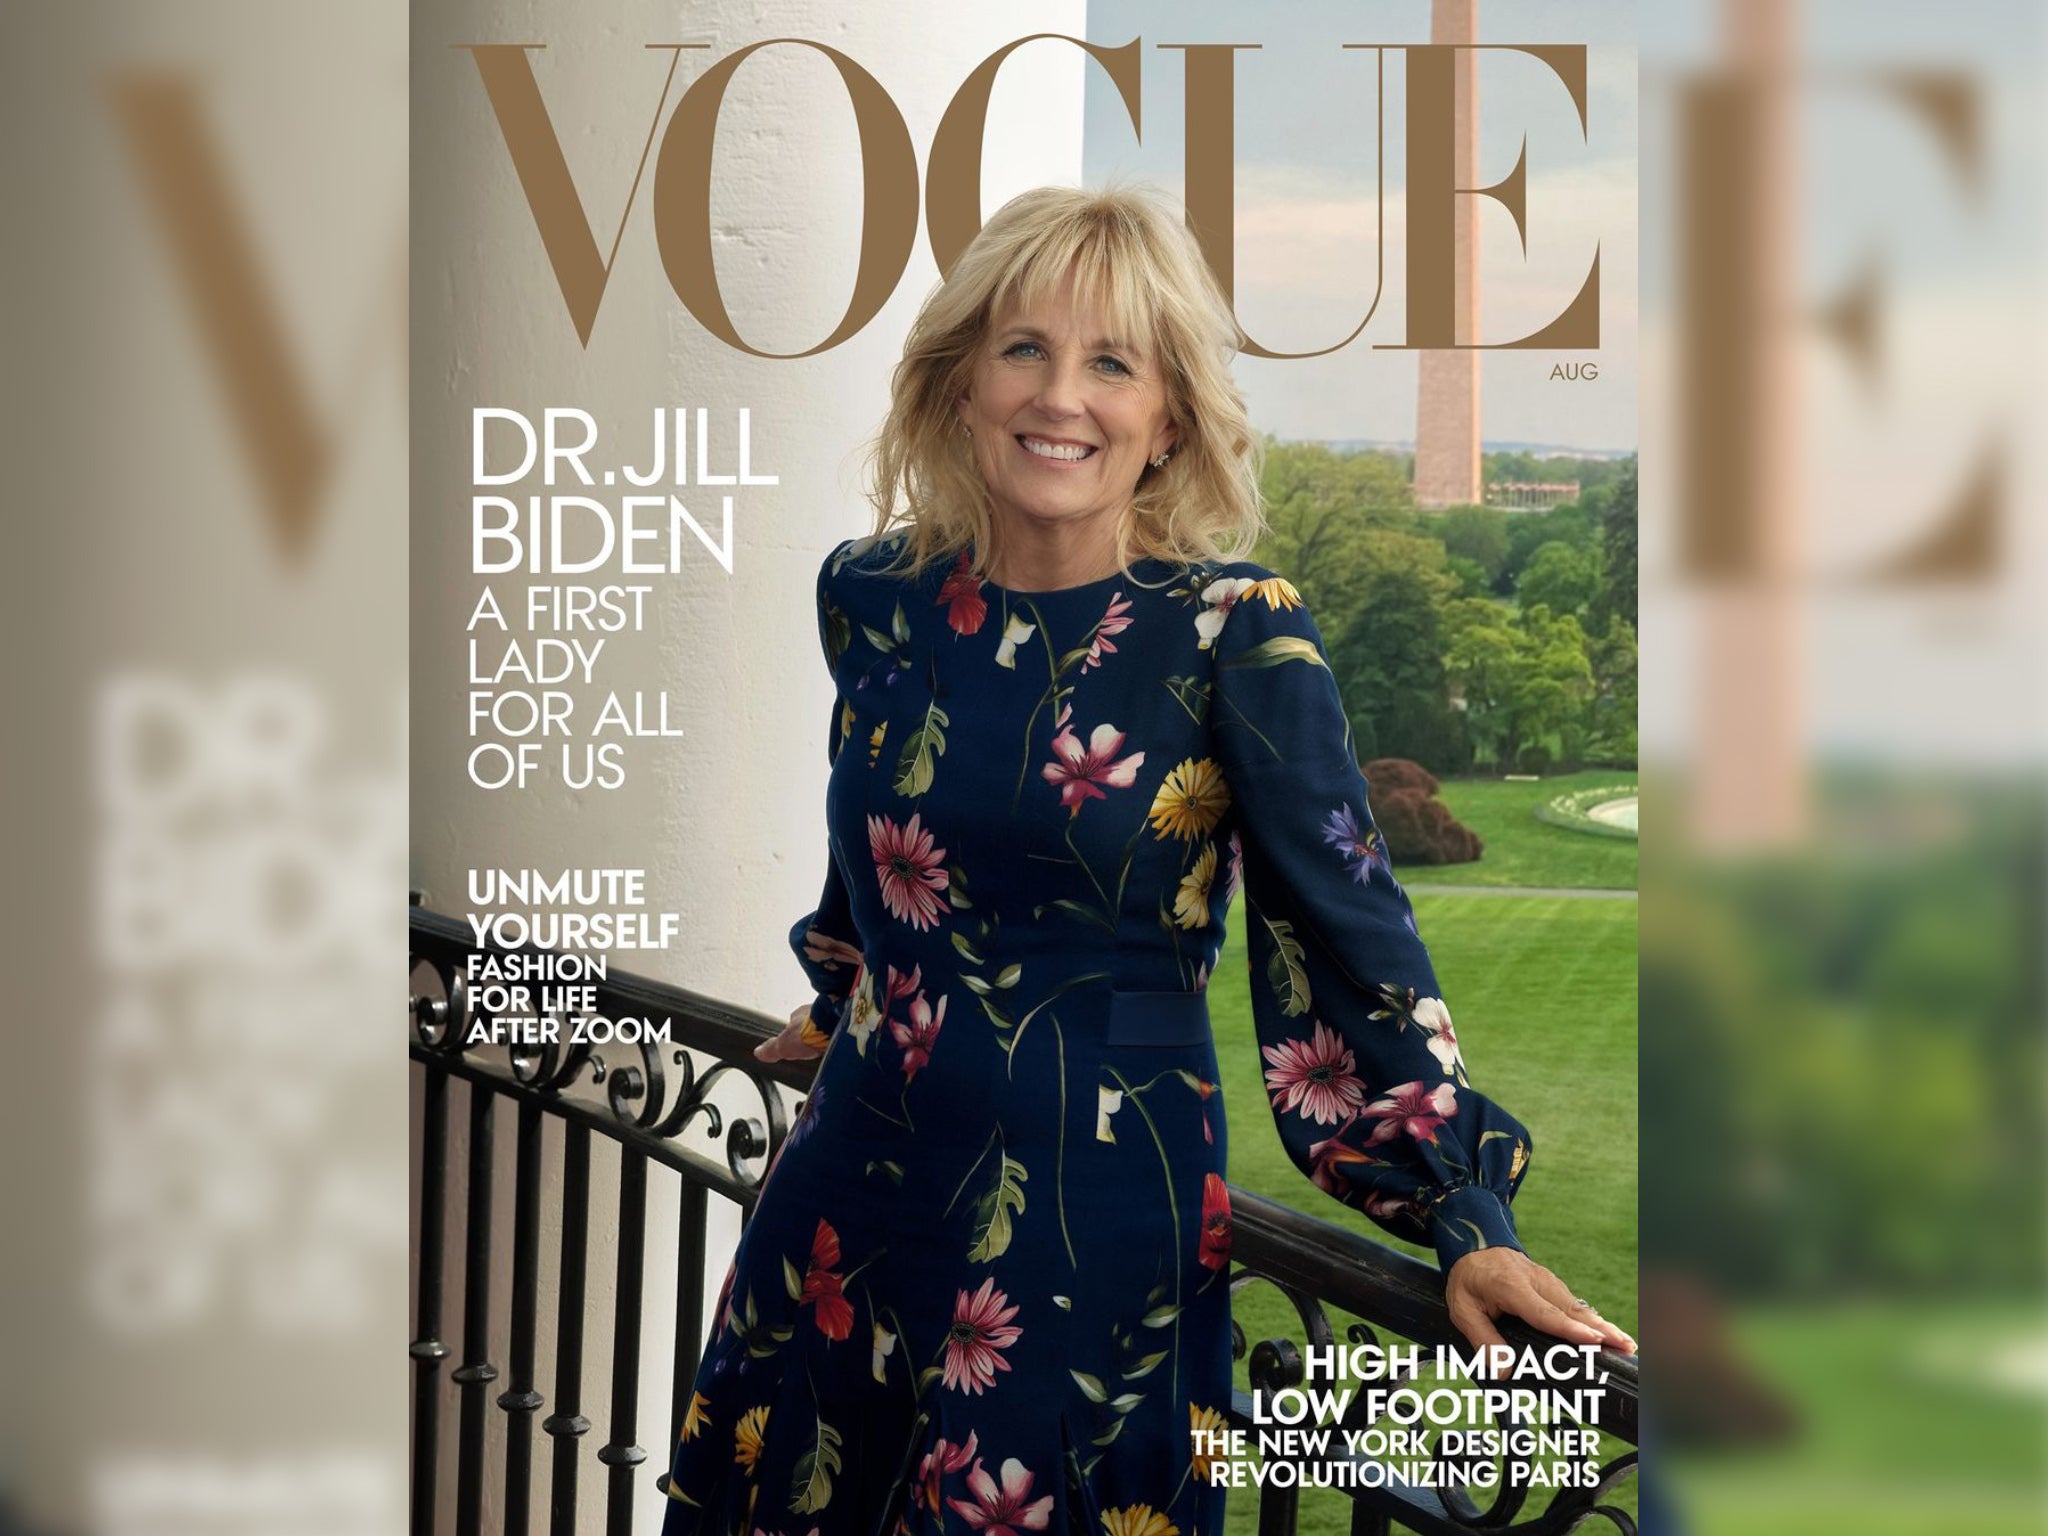 First Lady Jill Biden graced the cover of Vogue wearing a navy Oscar de la Renta dress after Melania Trump was not invited to do so during her husband’s presidency